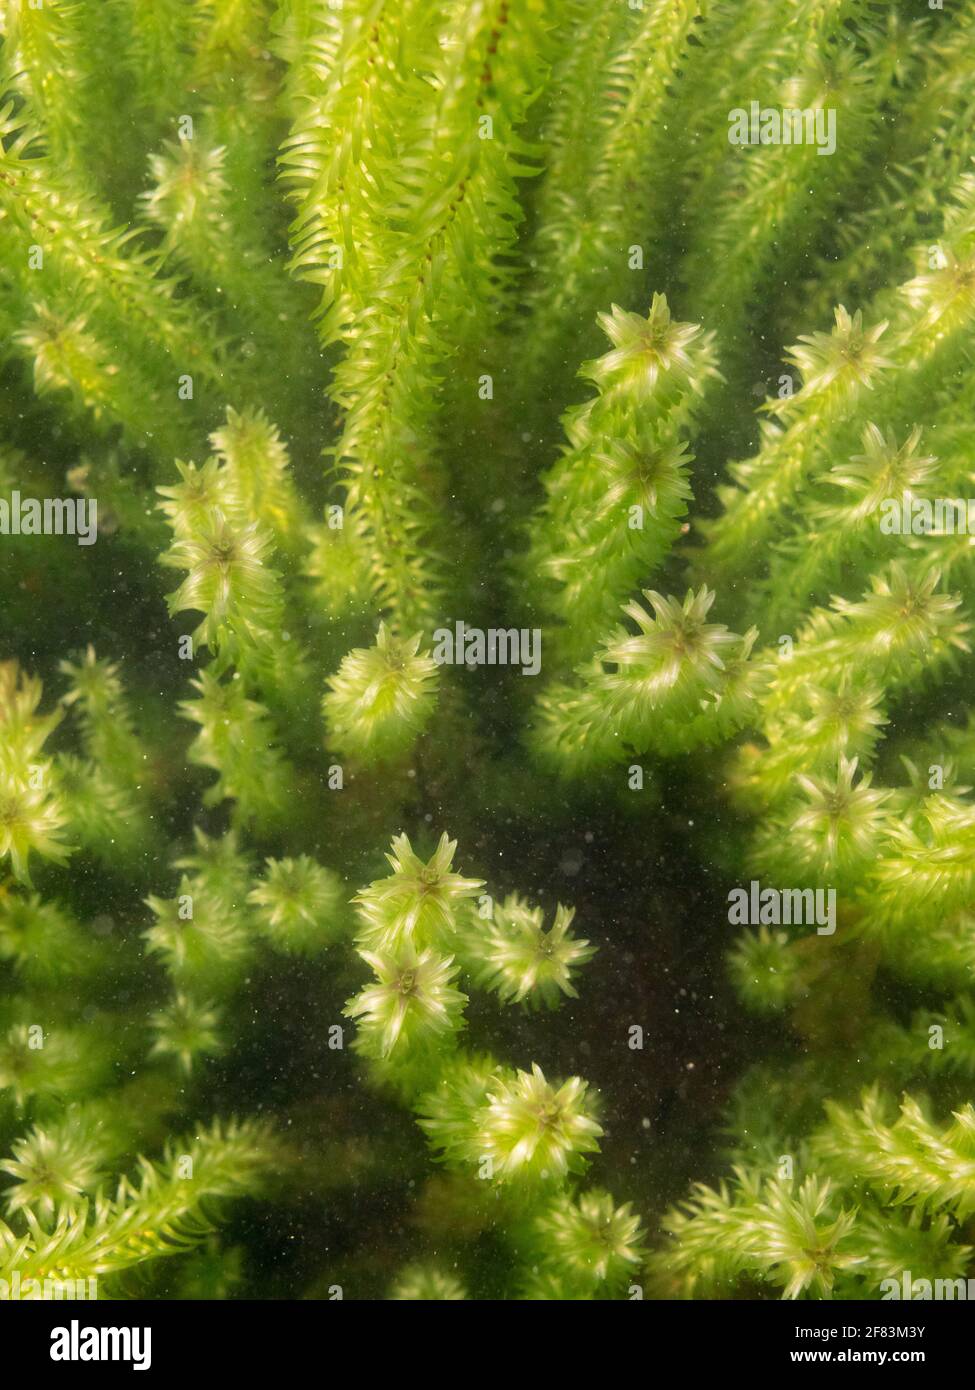 Overhead view of Canadian waterweed sprouts underwater in lake Stock Photo